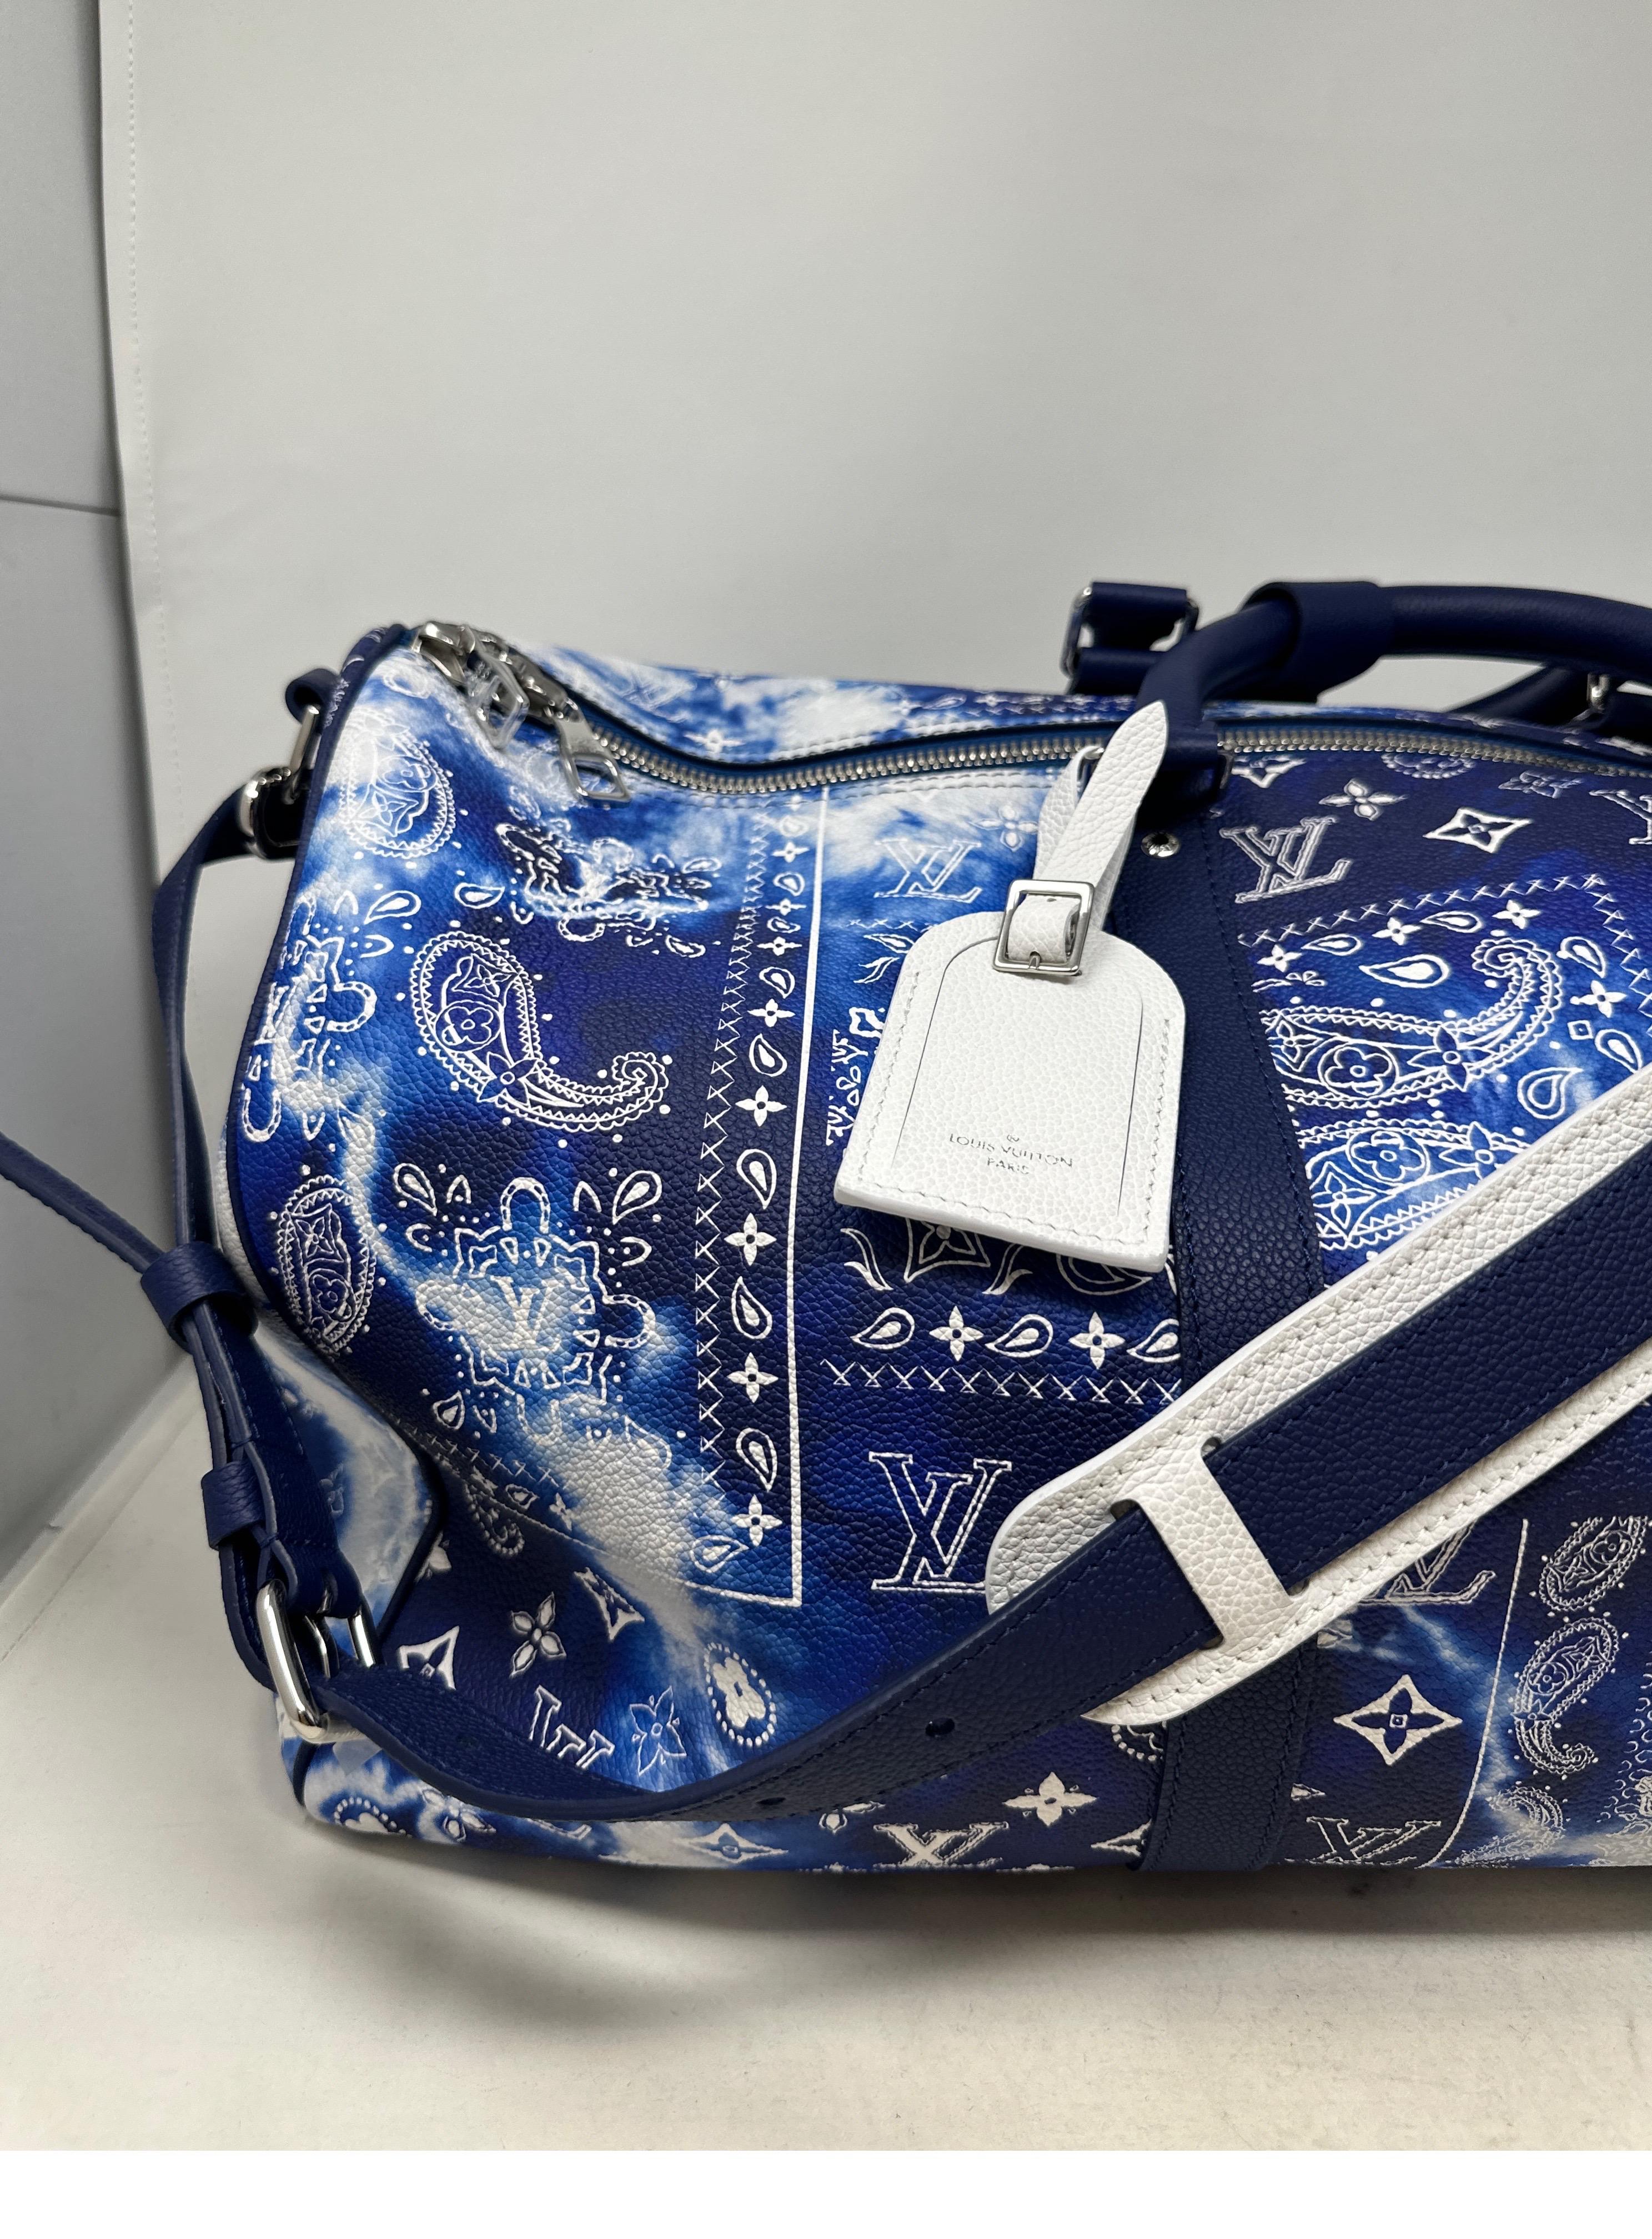 Louis Vuitton Limited Edition Bandana Keepall 50 Bag. Mint like new condition. Rare collector's bag. Never used. Limited bleached blue monogram design. Includes all the original accessories when purchased. Includes the original tags, lock, and keys.